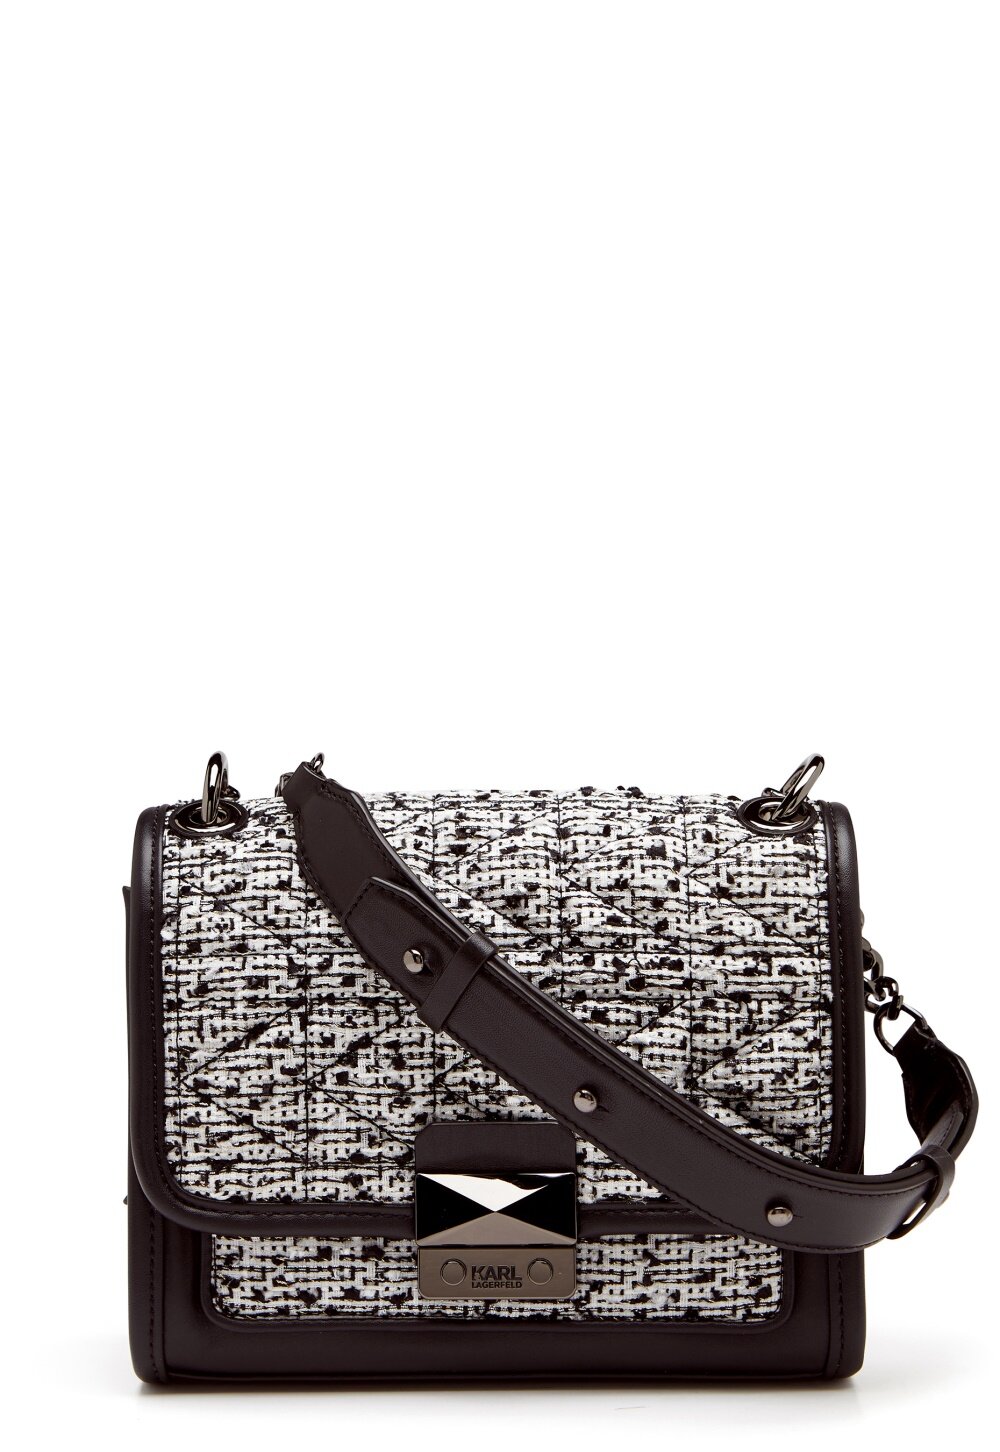 Karl Lagerfeld Quilted Tweed Small Bag Black/White - Bubbleroom